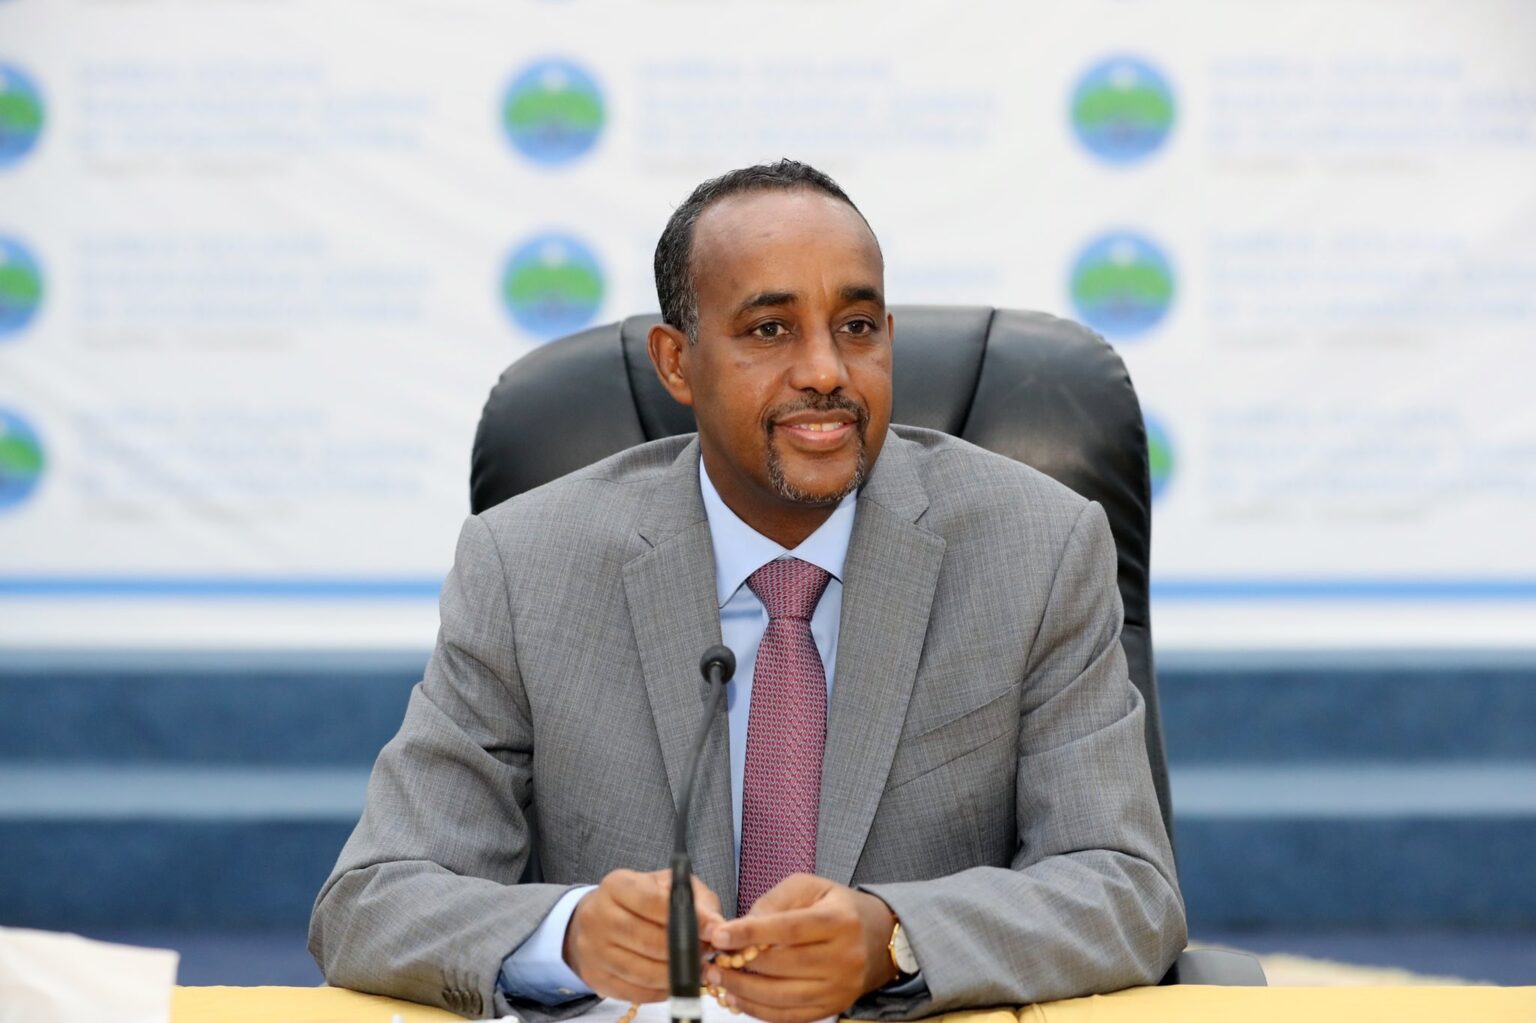 Somalia PM Mohamed Hussein Roble. He has apologised to the UAE for the seizure of US$9.6 million in April 2018. www.theexchange.africa